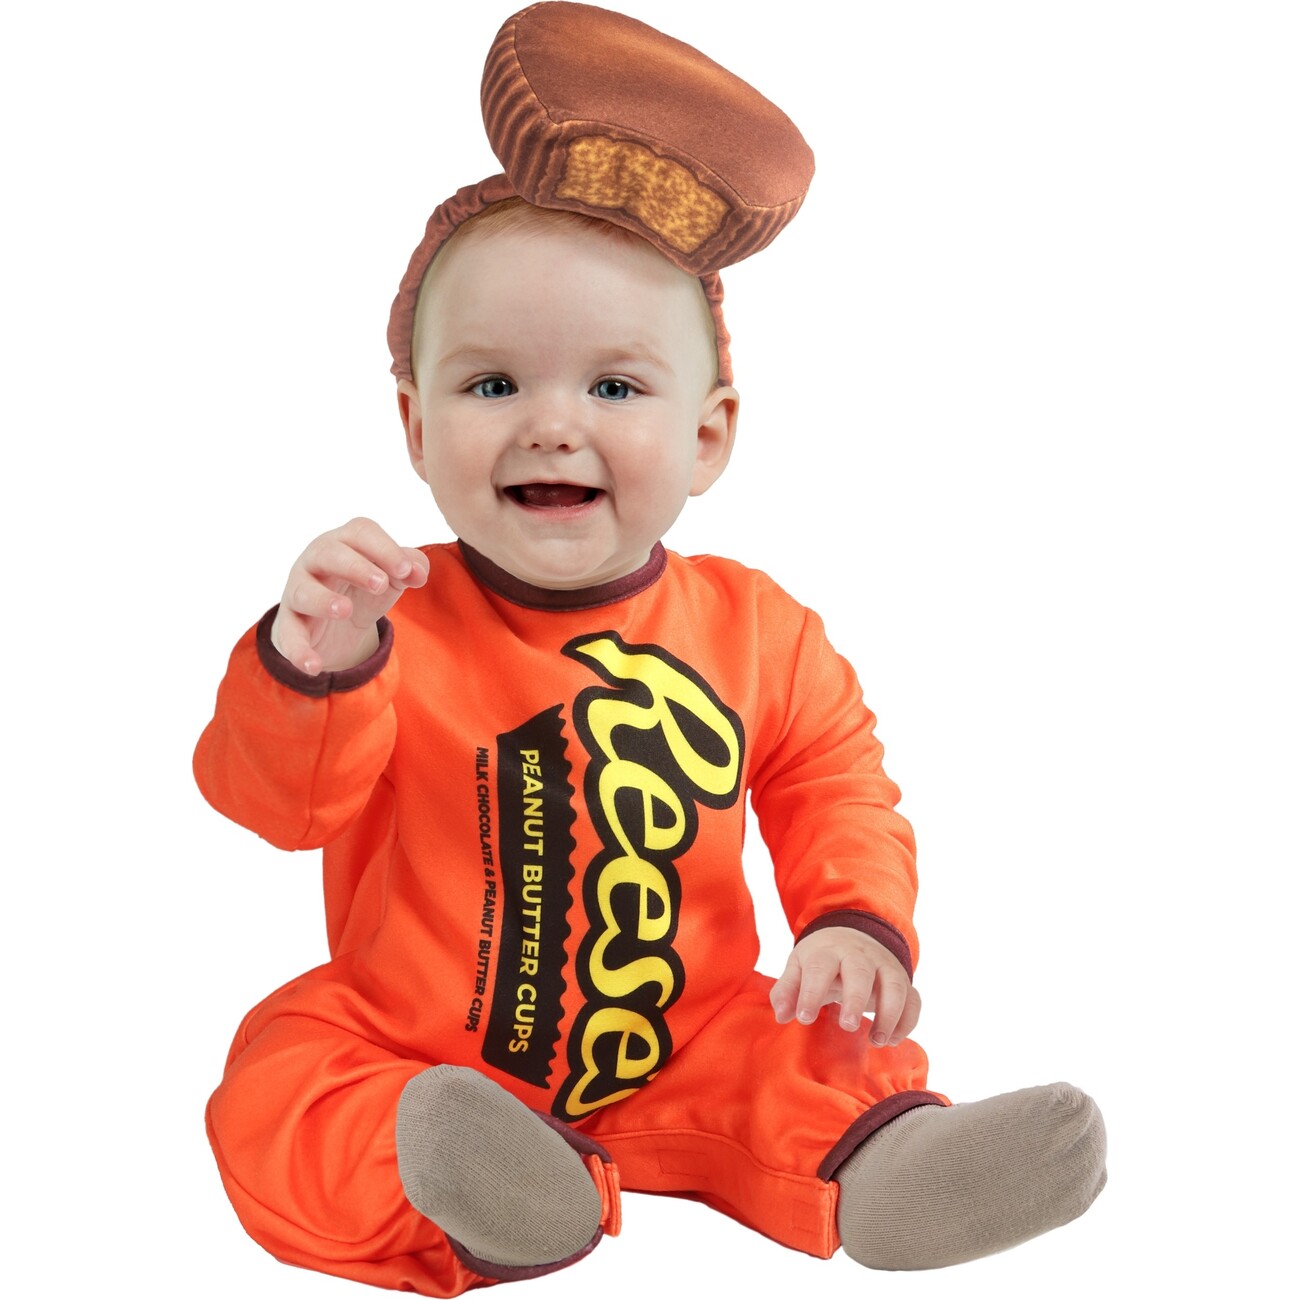 Reese's Peanut Butter Cup Infant/Toddler Costume - Rubies Play